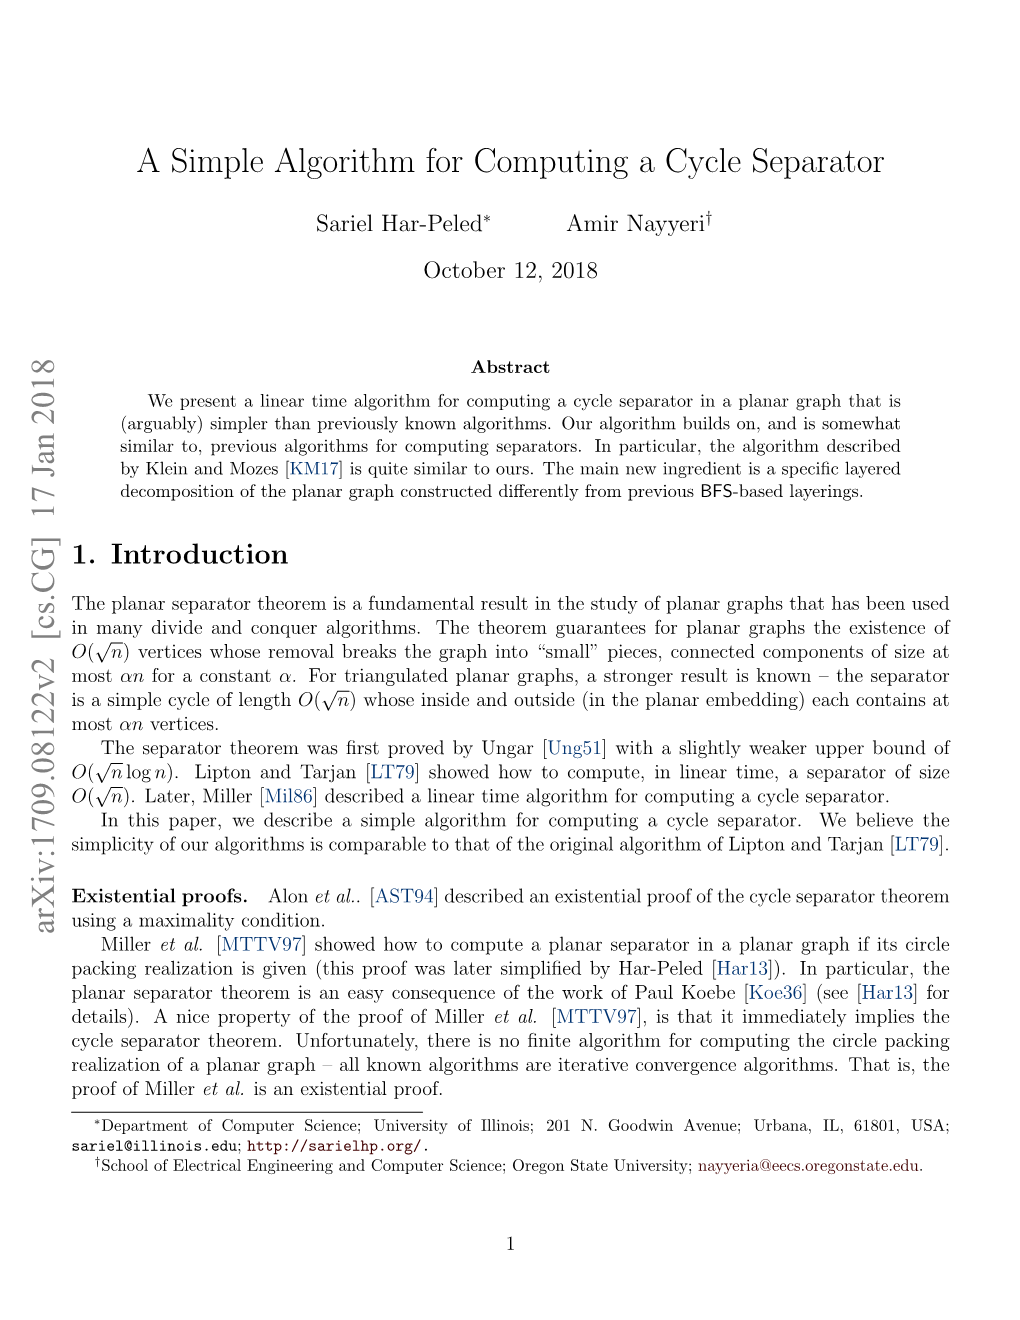 A Simple Algorithm for Computing a Cycle Separator